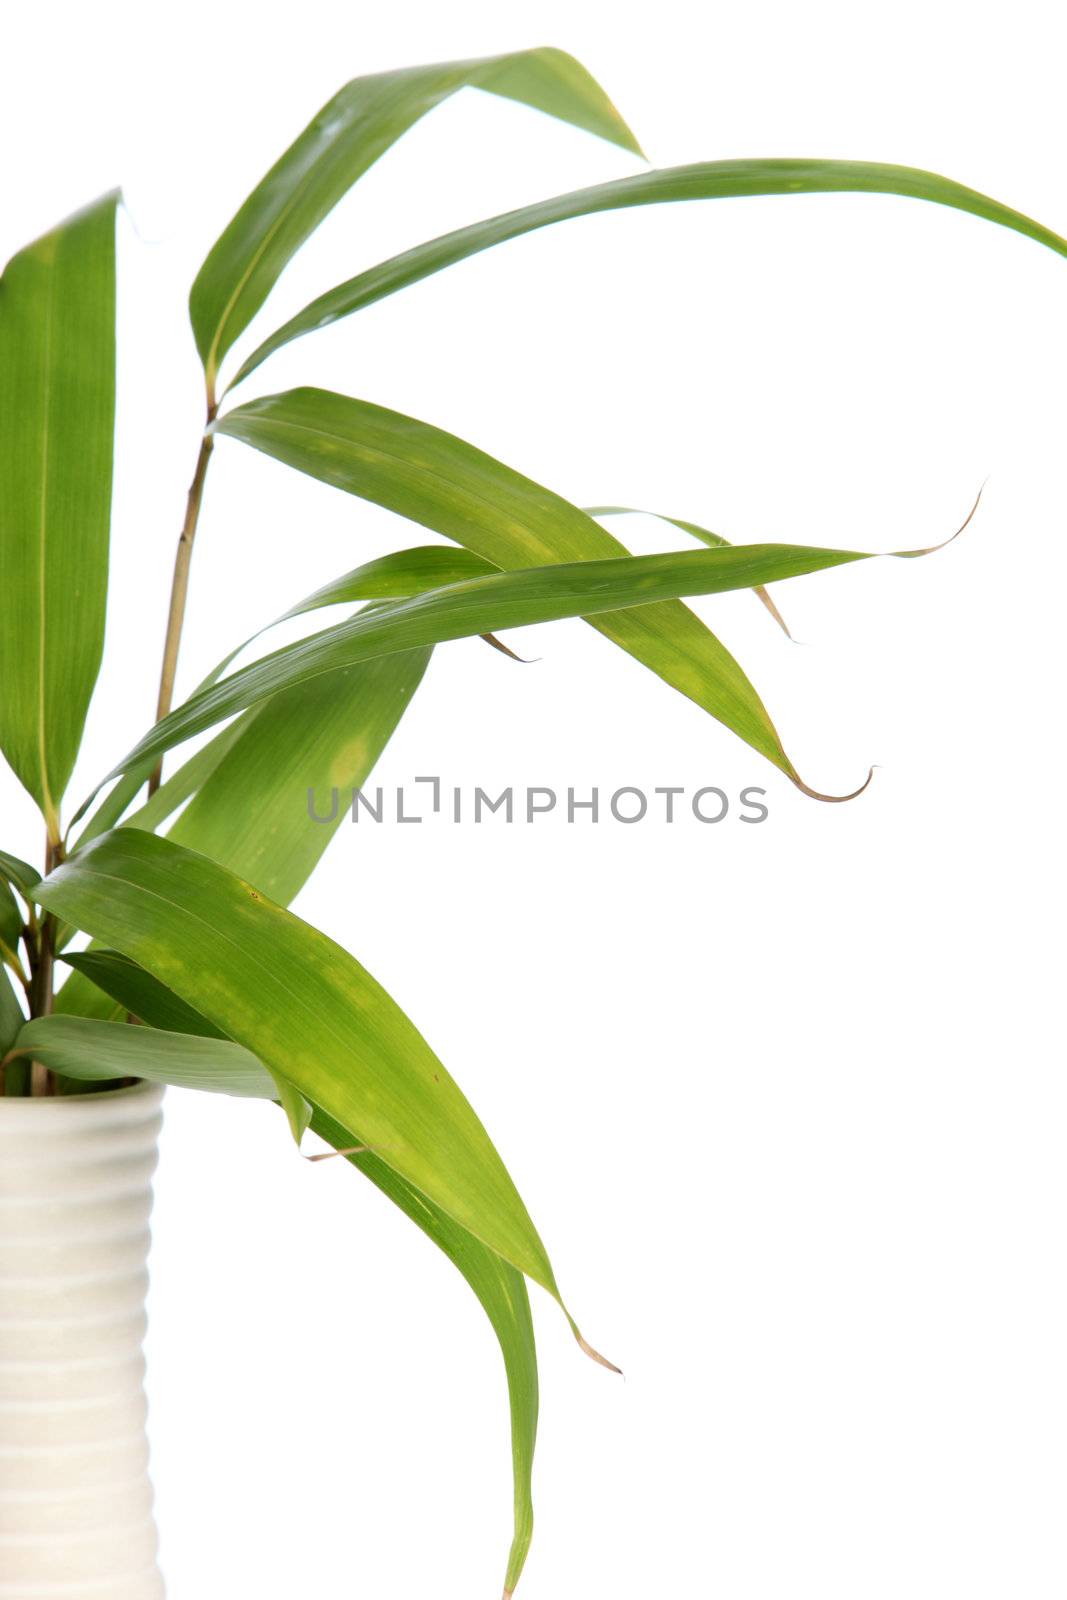 Leaves of a bamboo plant in a vase